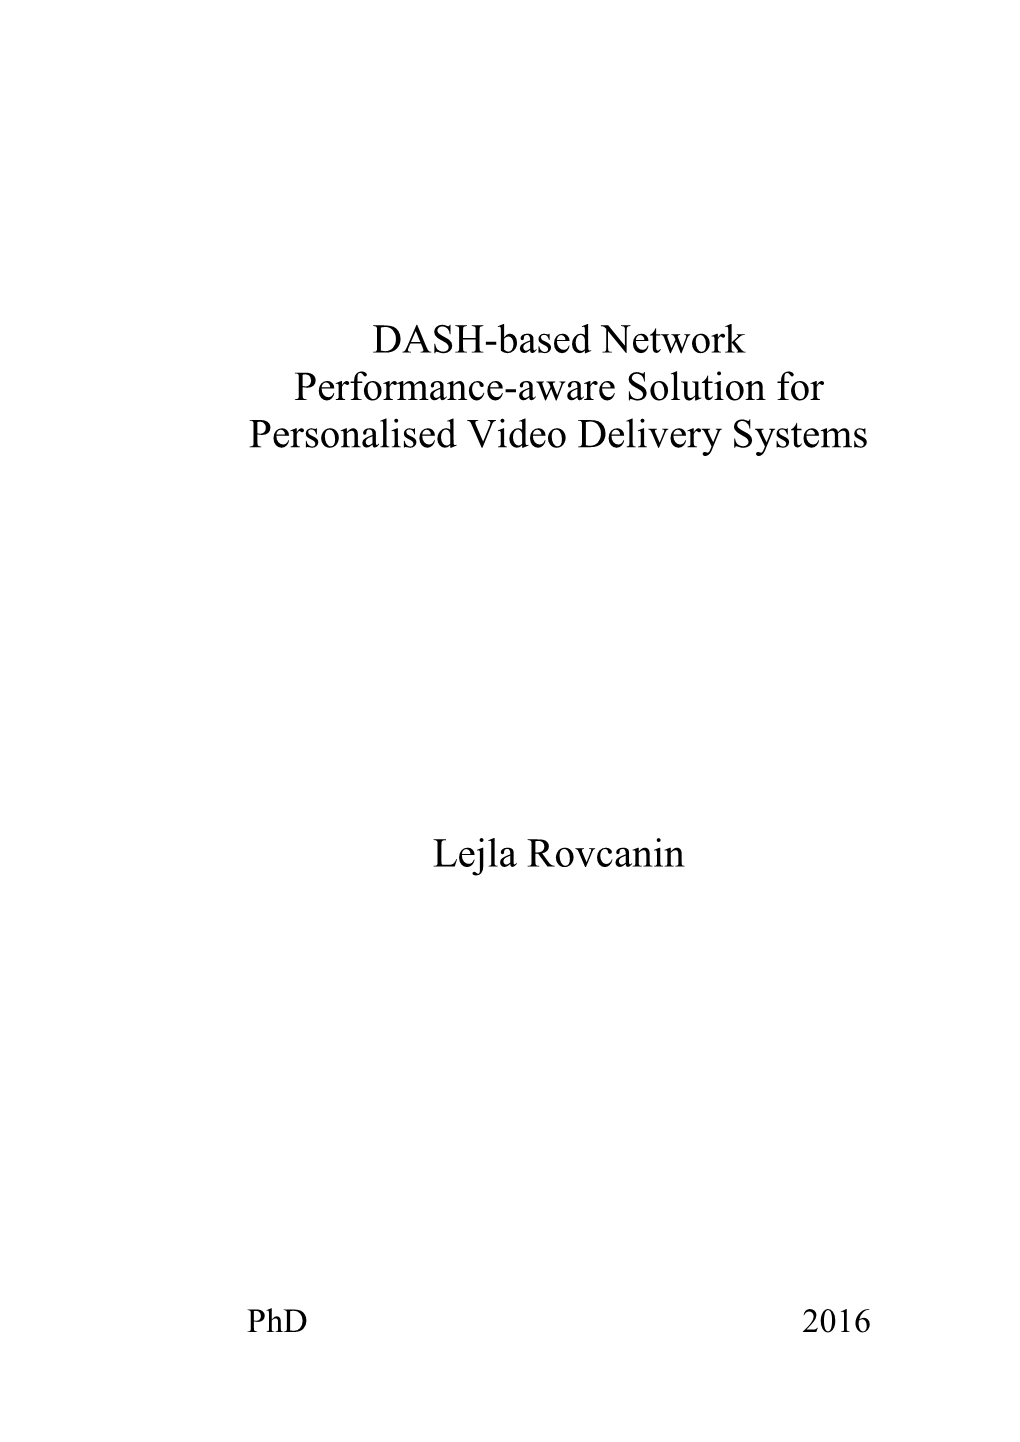 DASH-Based Network Performance-Aware Solution for Personalised Video Delivery Systems